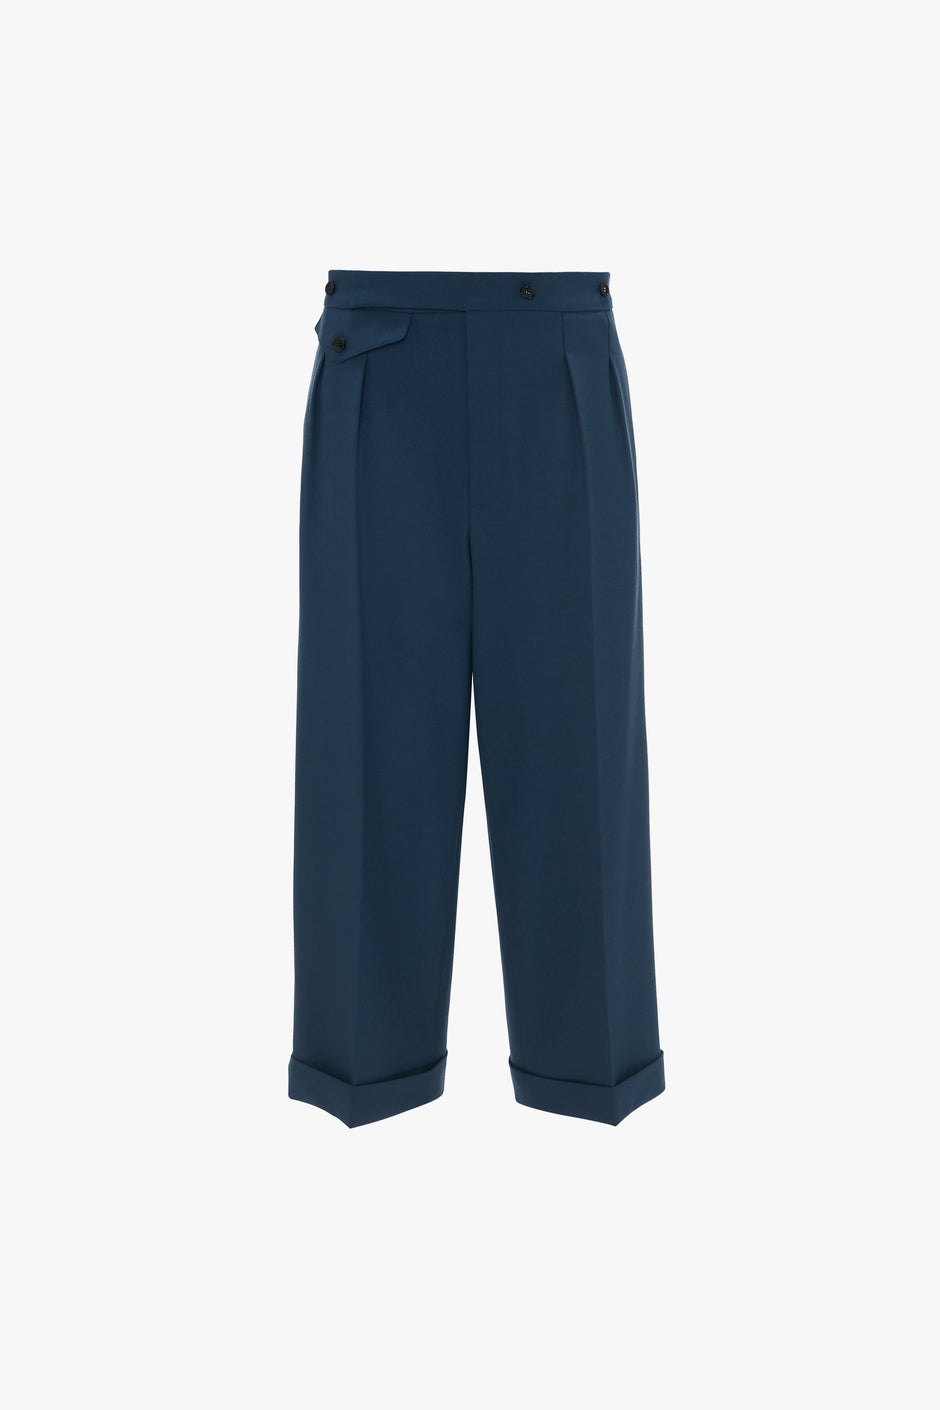 Tailored Women's Trousers | Designer Trousers | Victoria Beckham ...